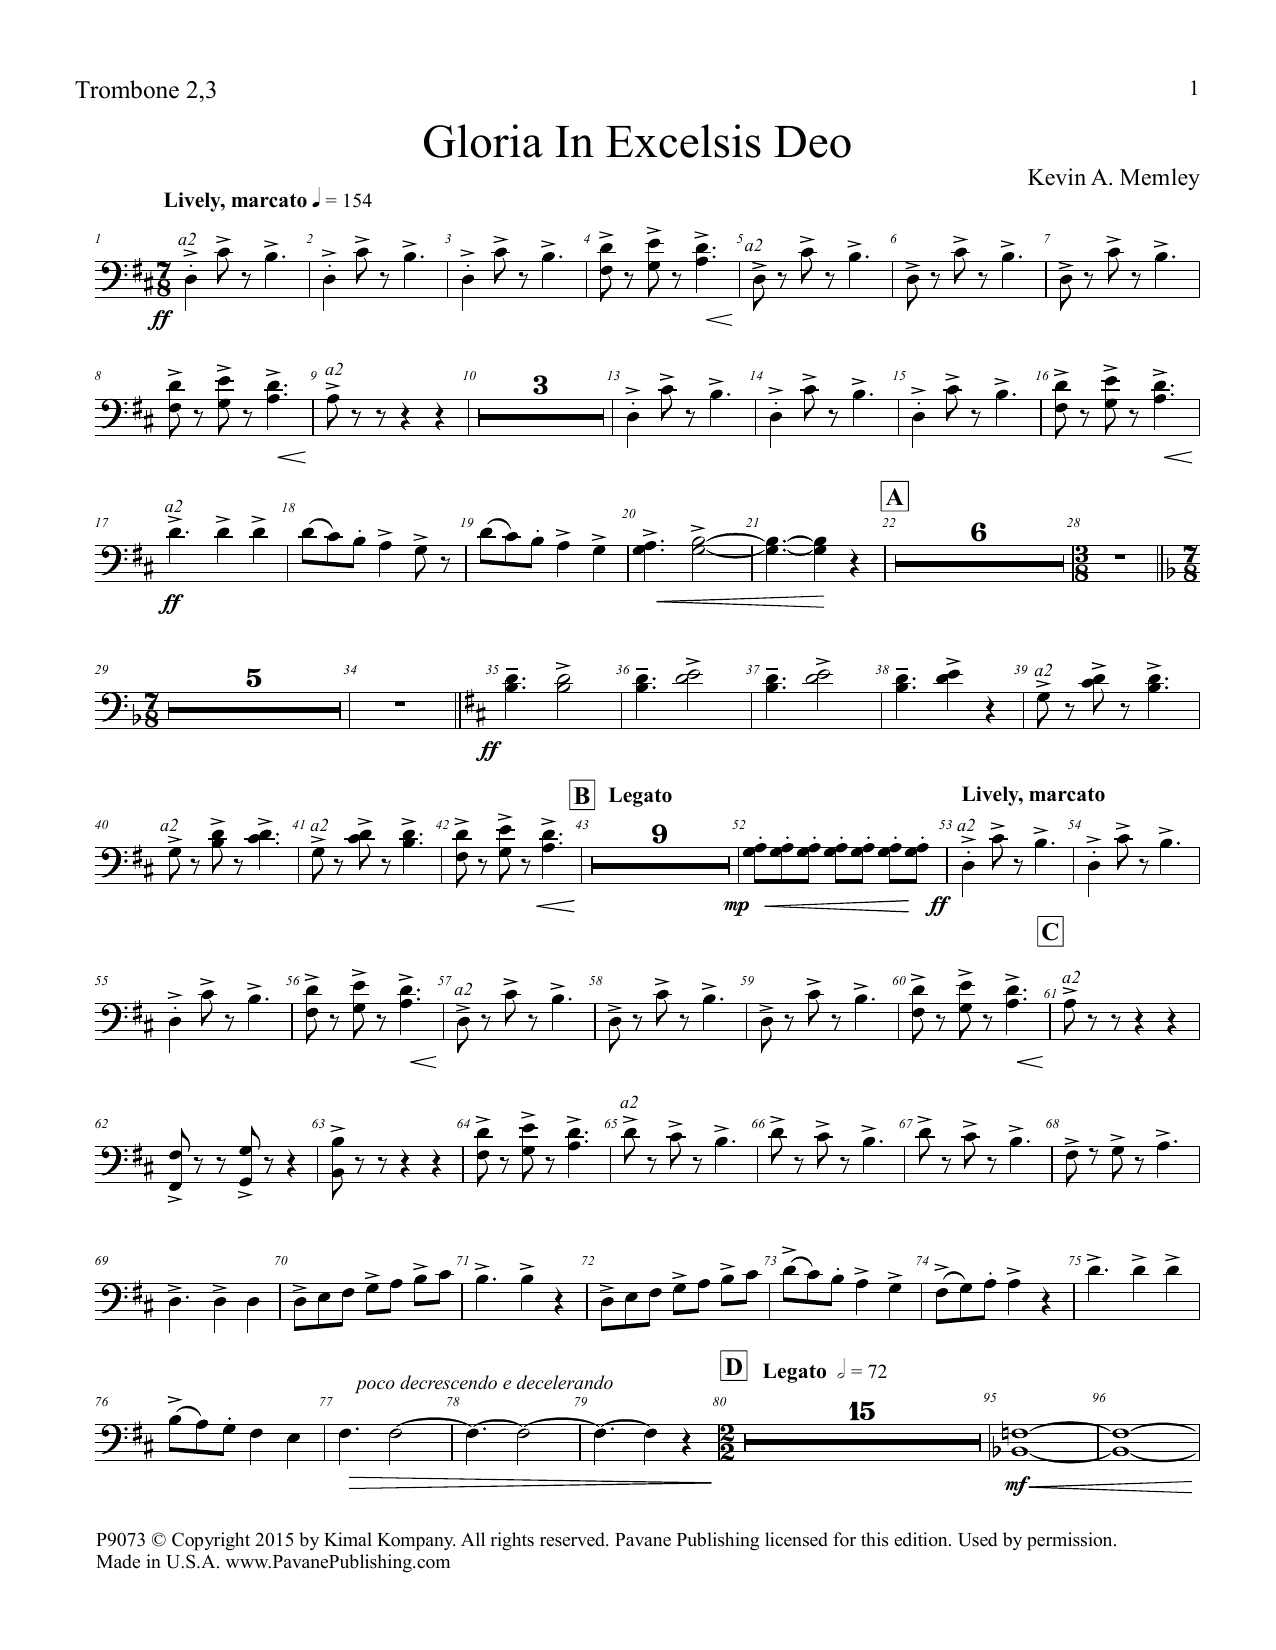 Download Kevin A. Memley Gloria in Excelsis Deo - Trombone 2 & 3 Sheet Music